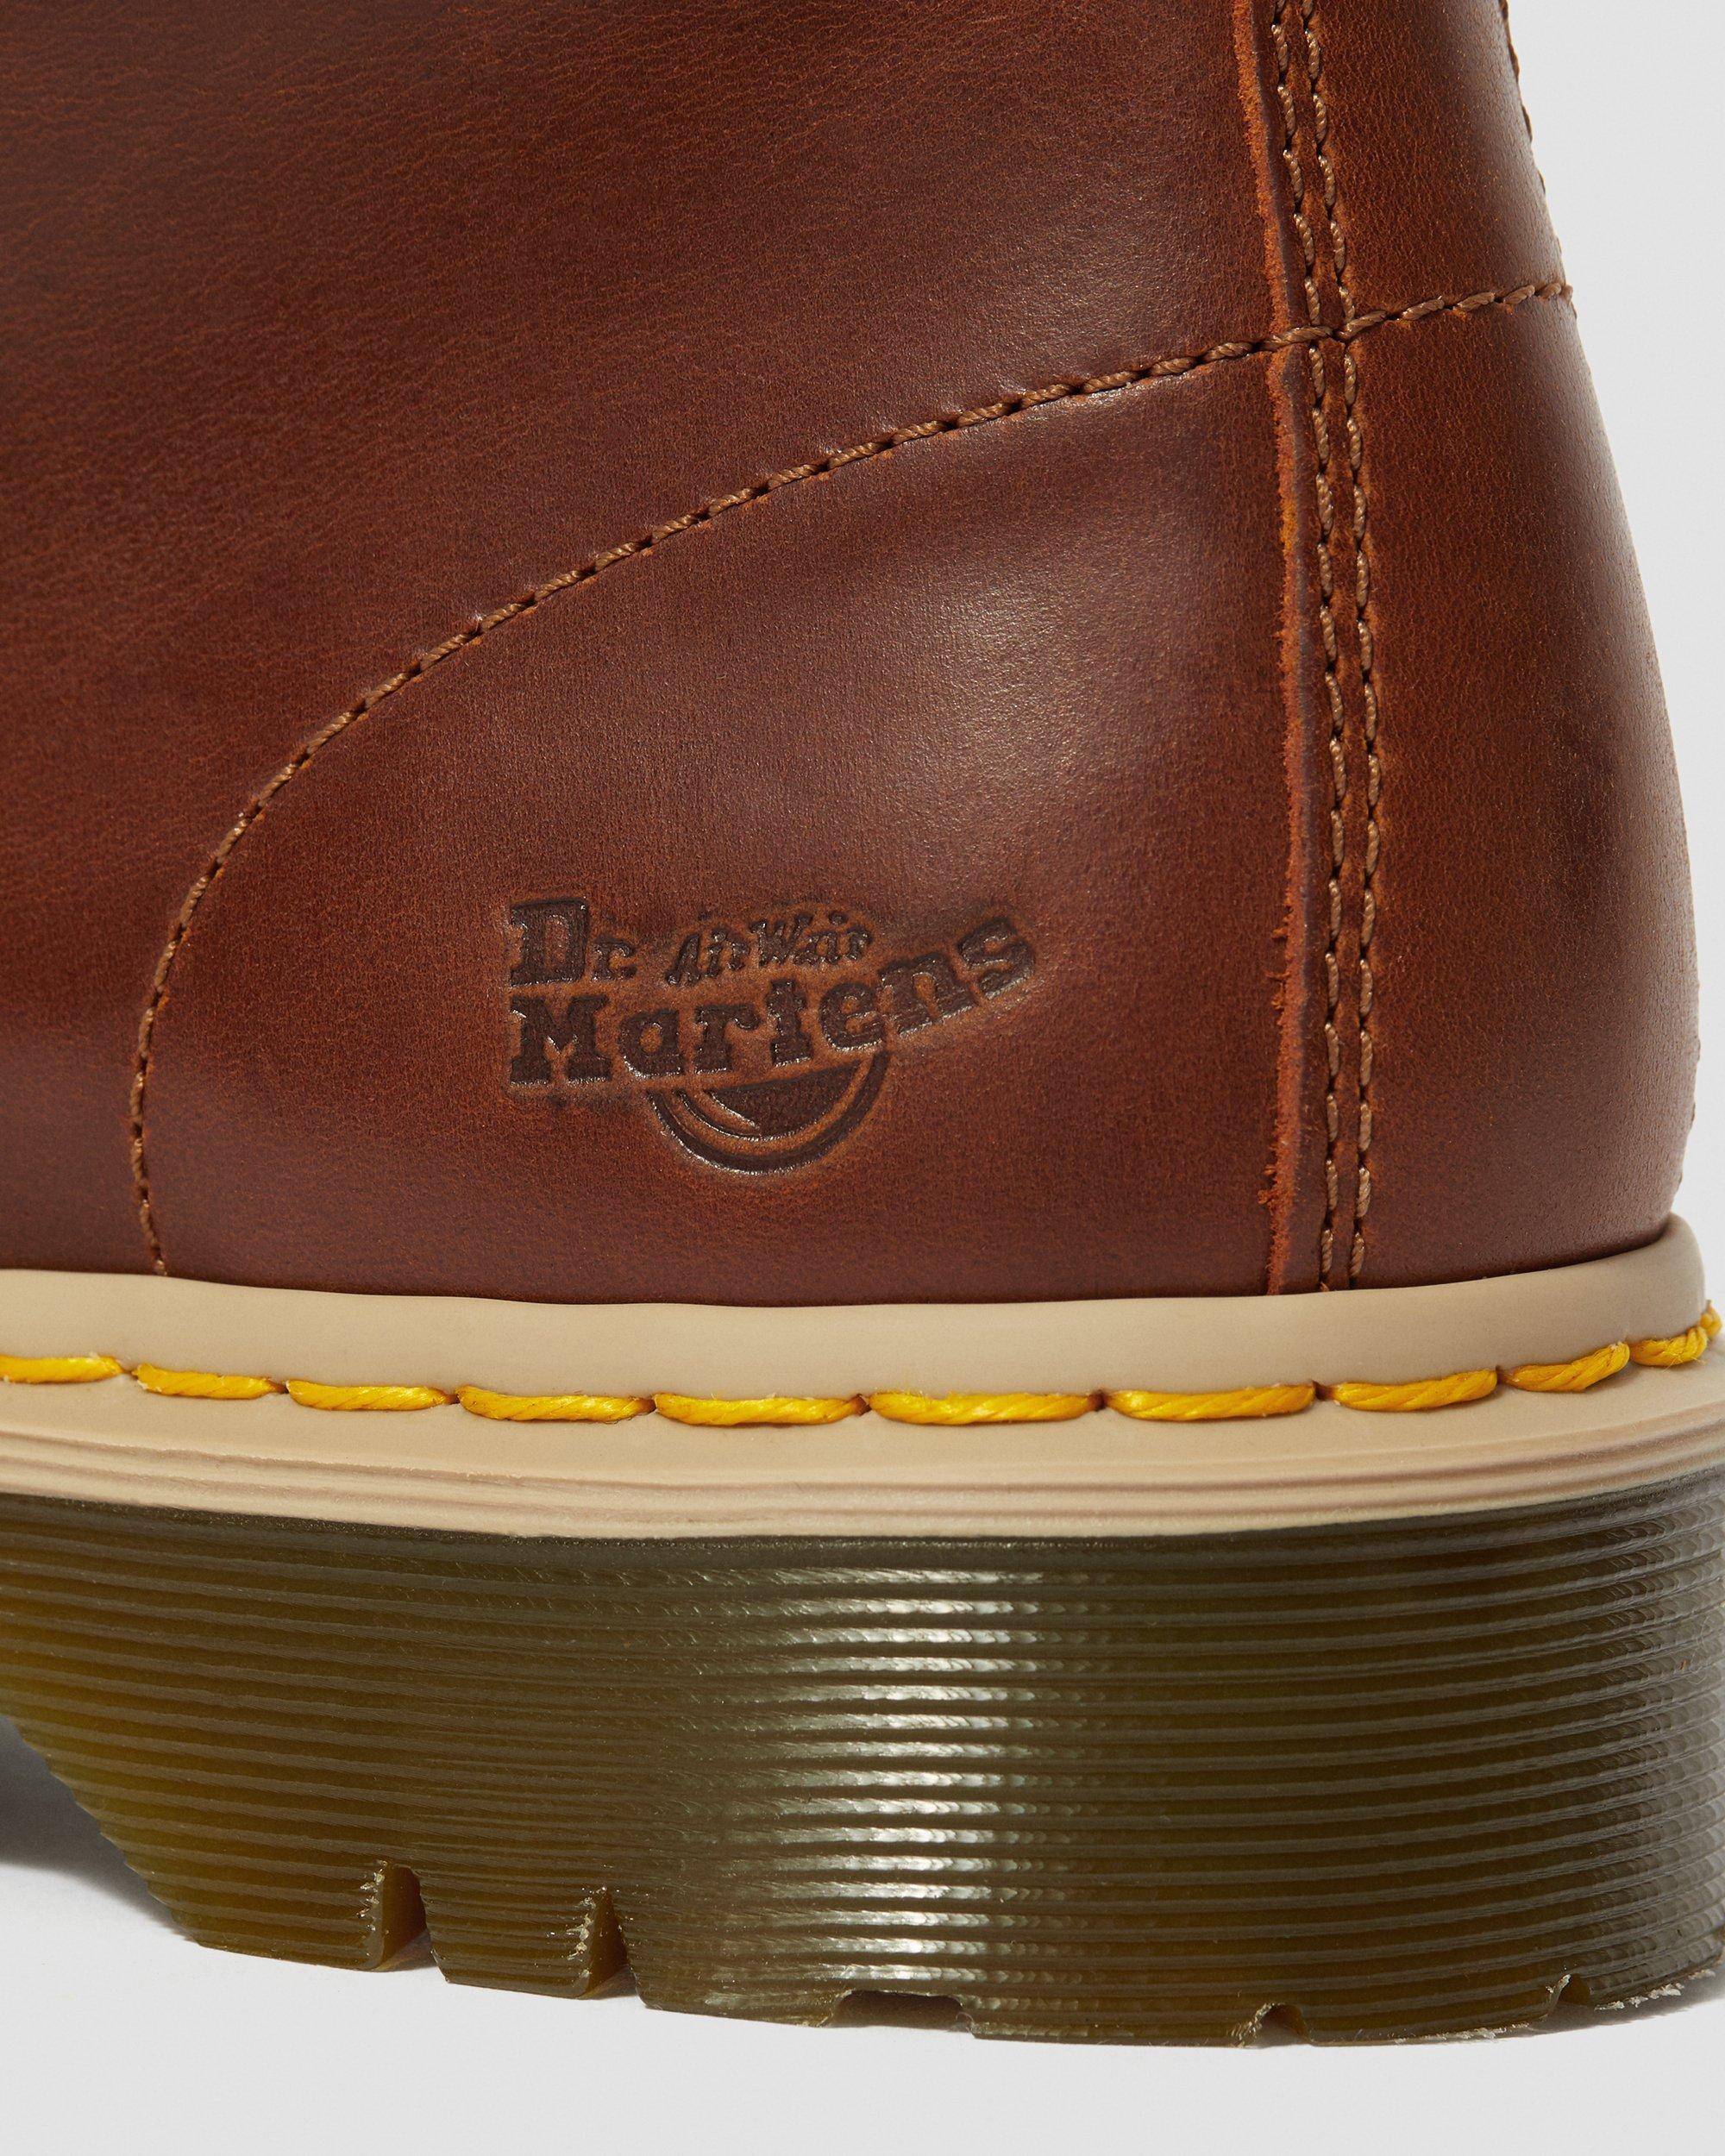 Icon 7B10 Steel Toe Work Boots in Tan | Dr. Martens